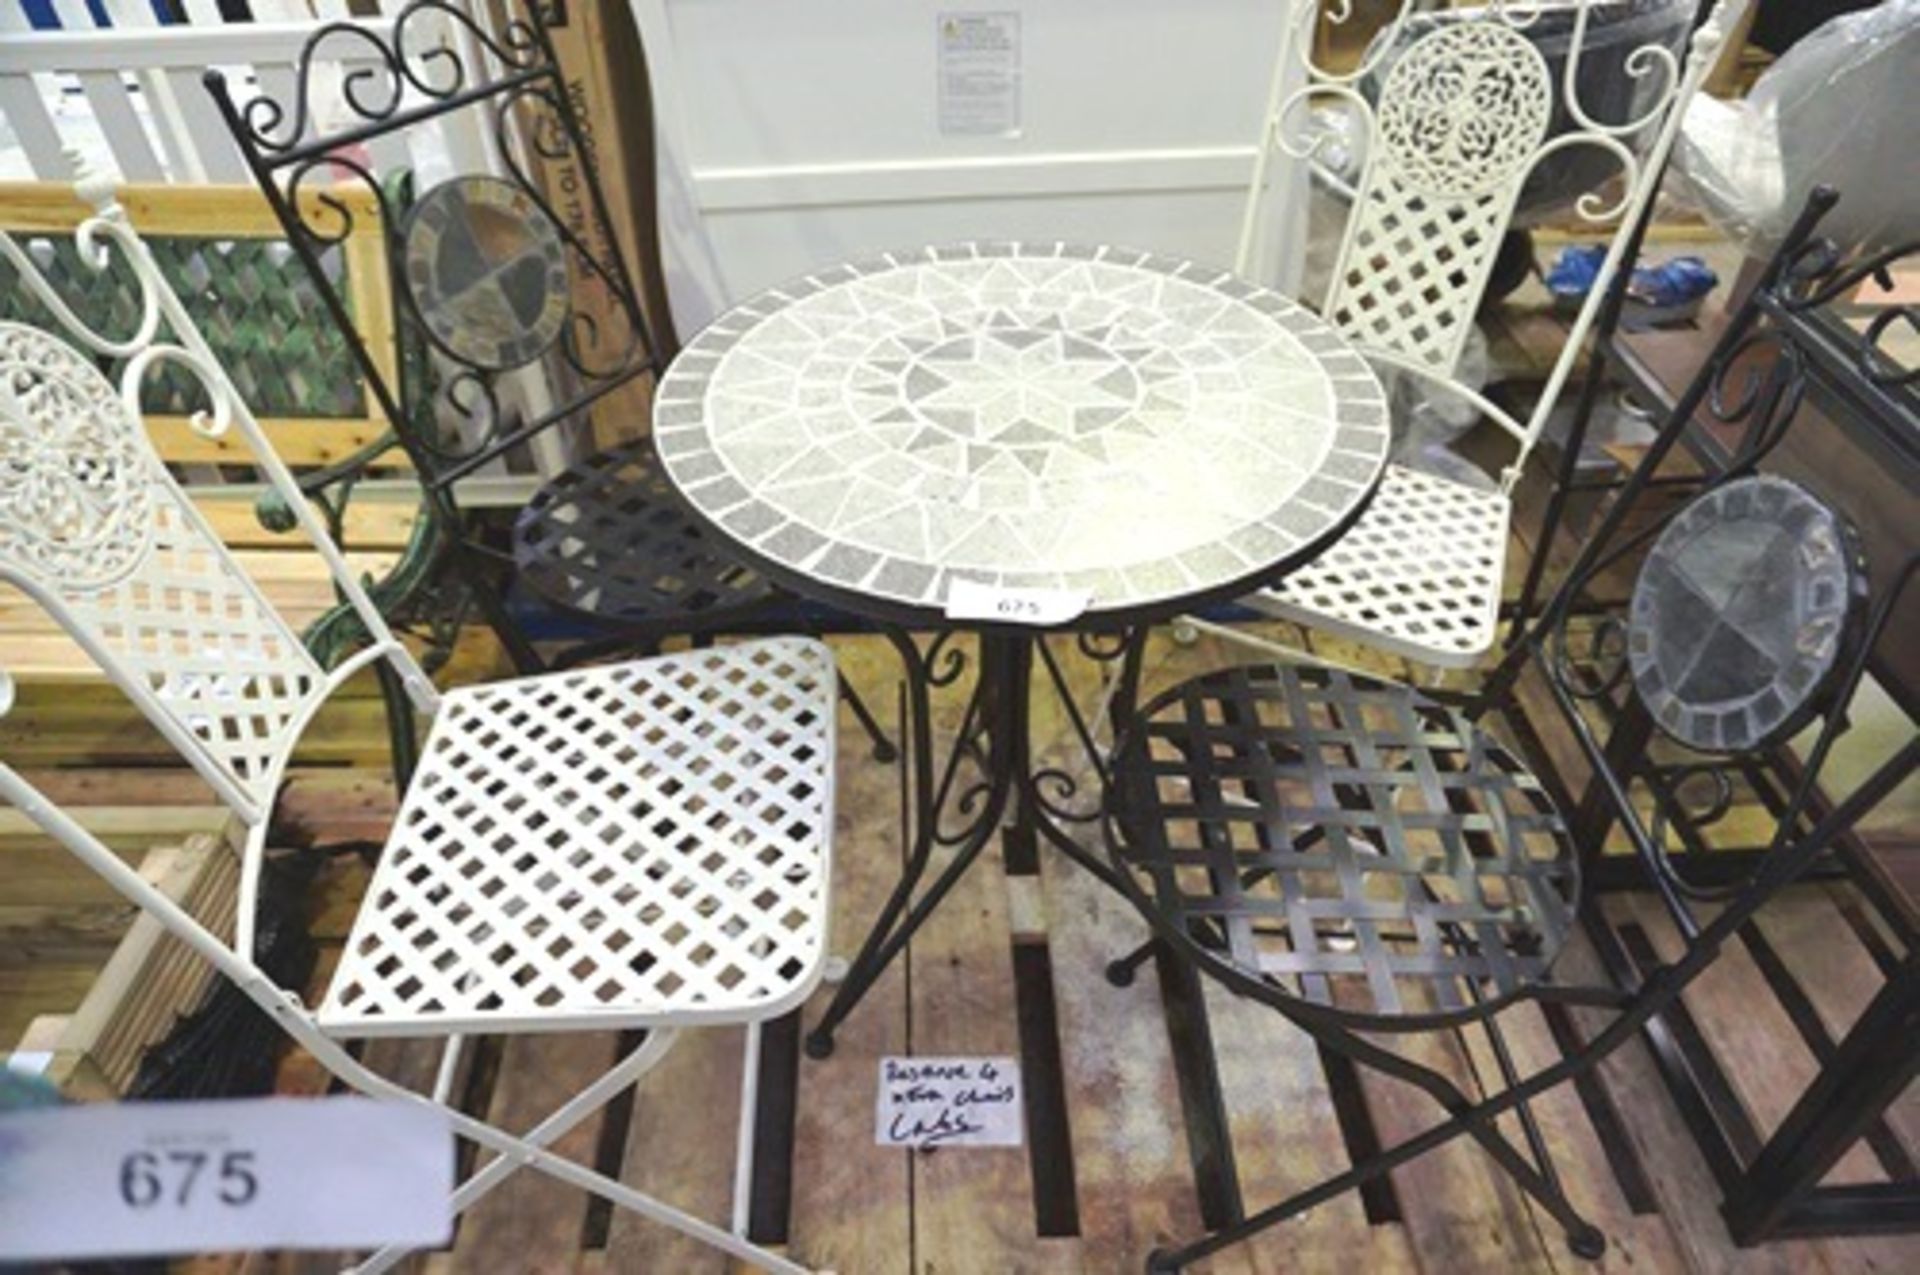 2 x black mosaic garden chairs and table together with 2 x white metal folding garden chairs -